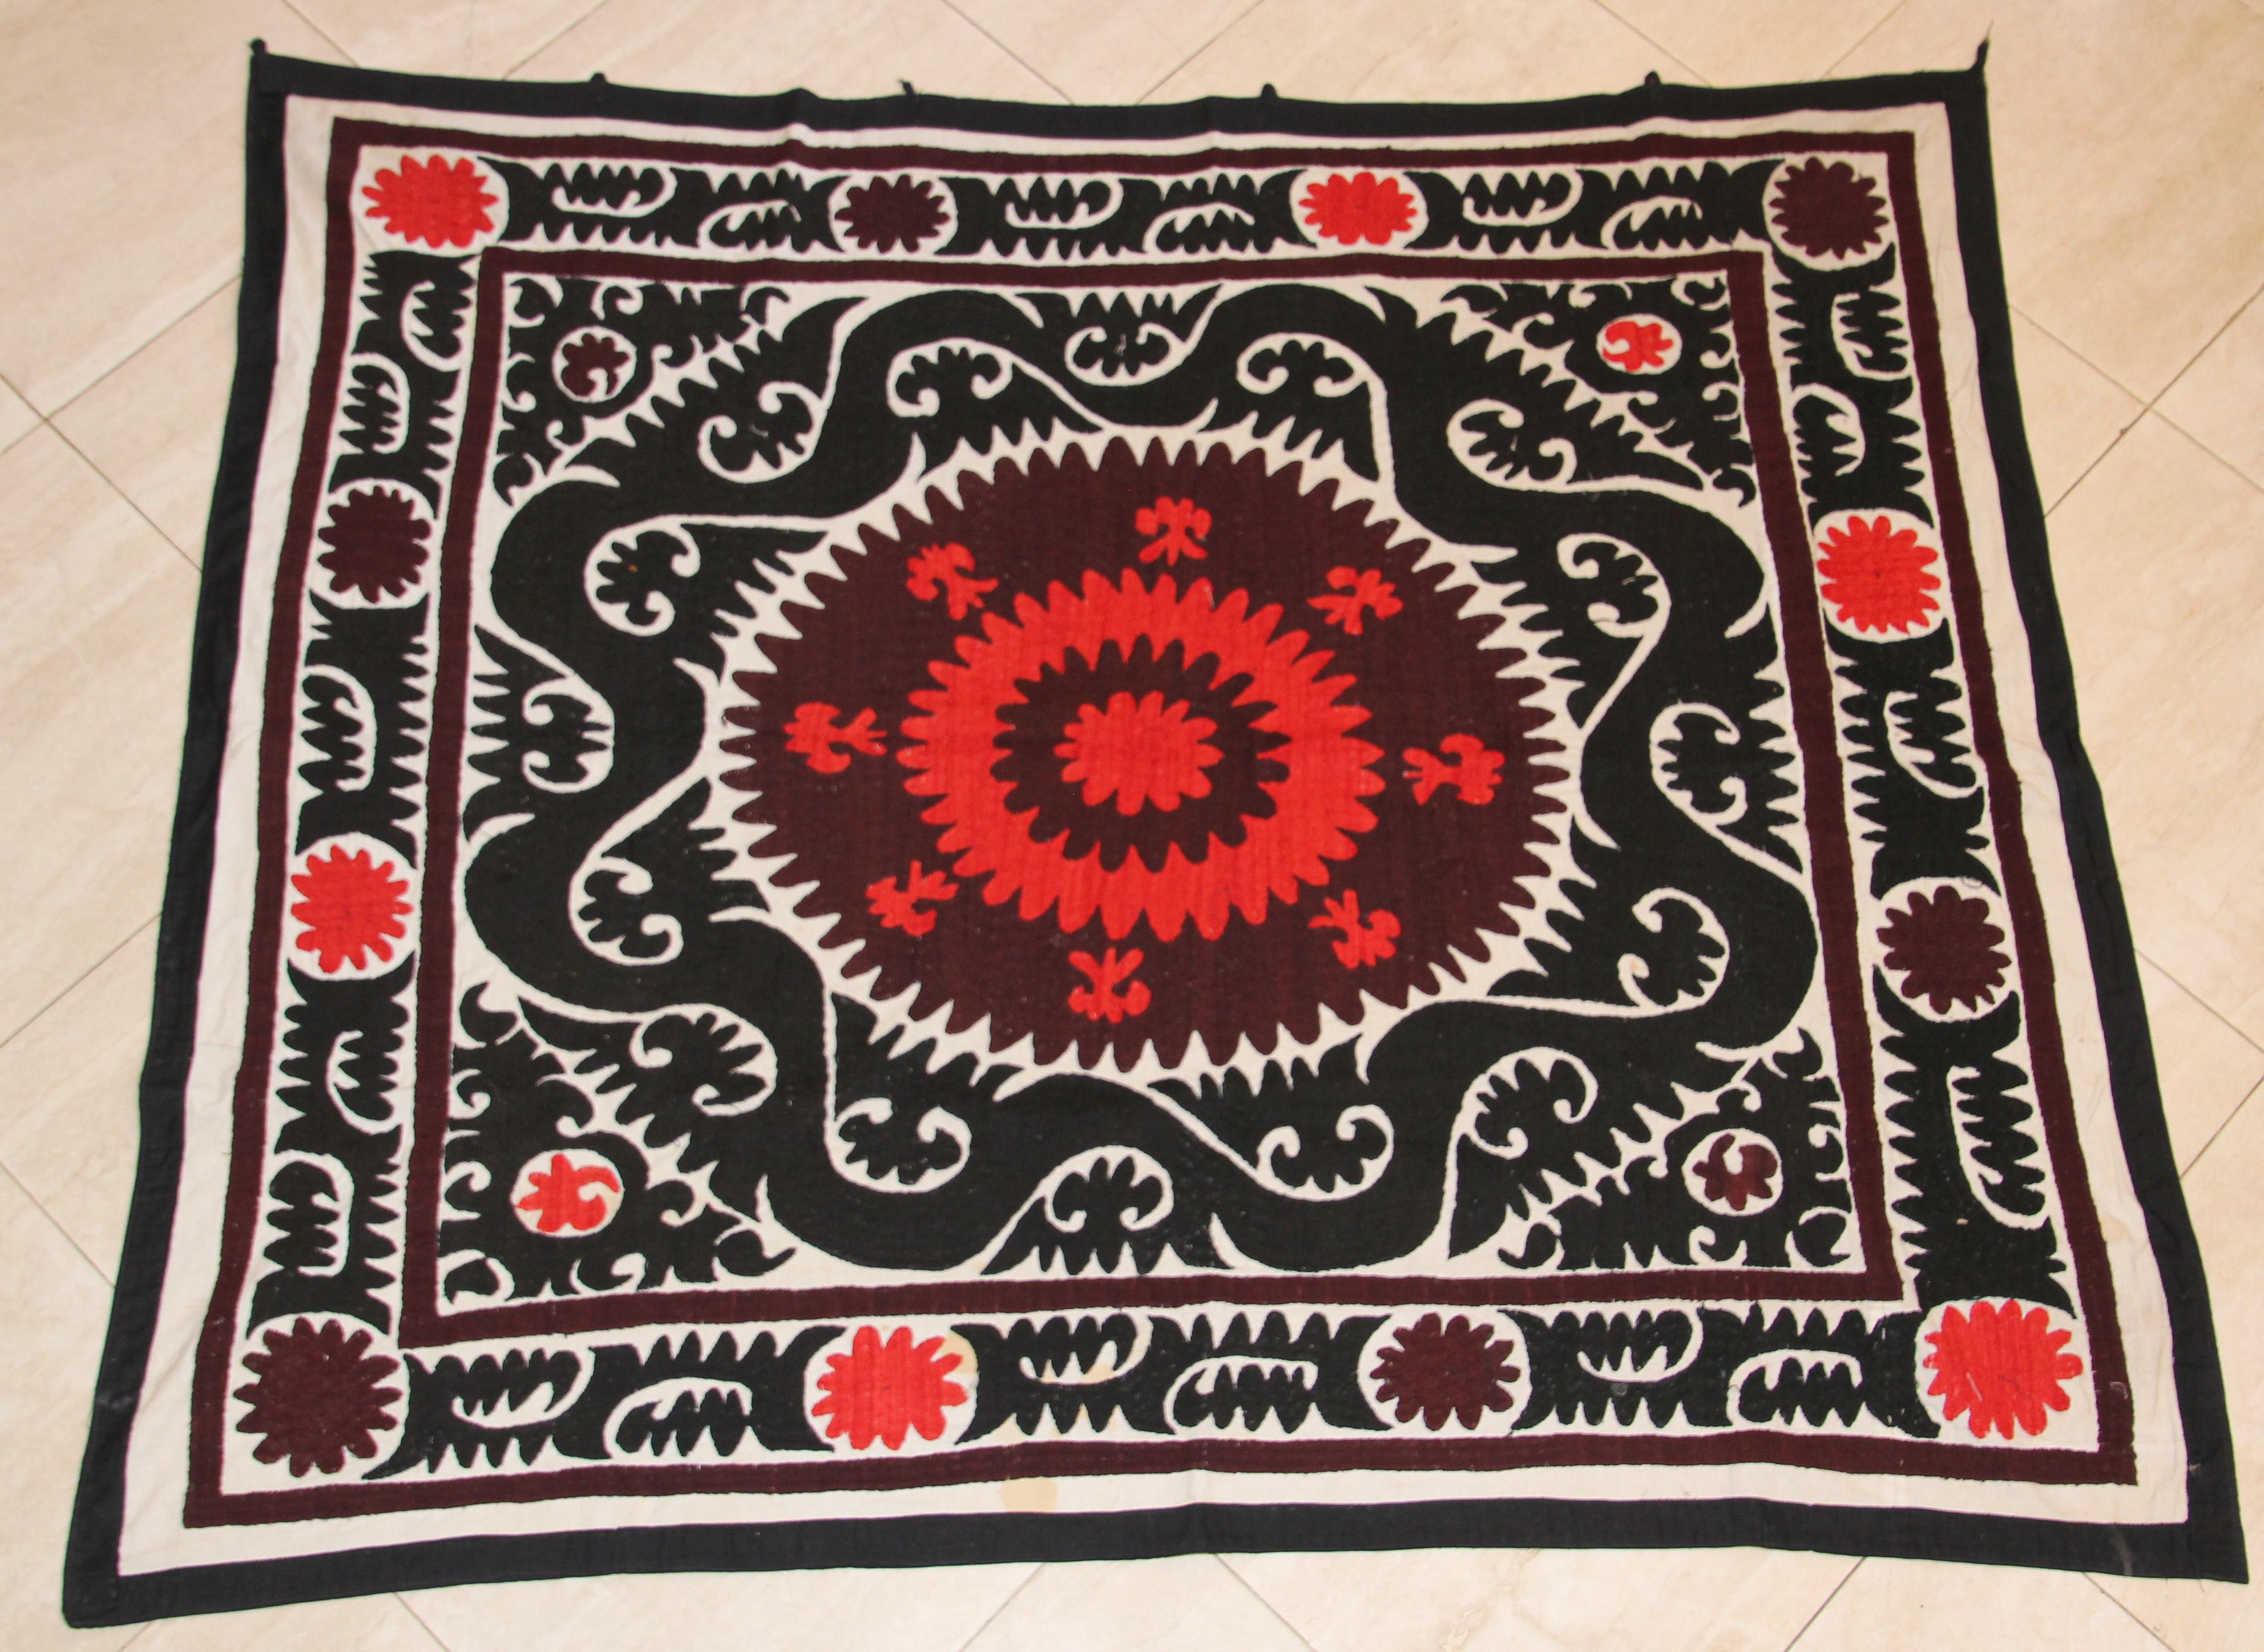 Vintage Samarkand Suzani, Uzbekistan embroidered textile red and black
Tashkent Suzani from Samarkand Uzbekistan, 1950.
Overall good condition for its age and use some stains.
